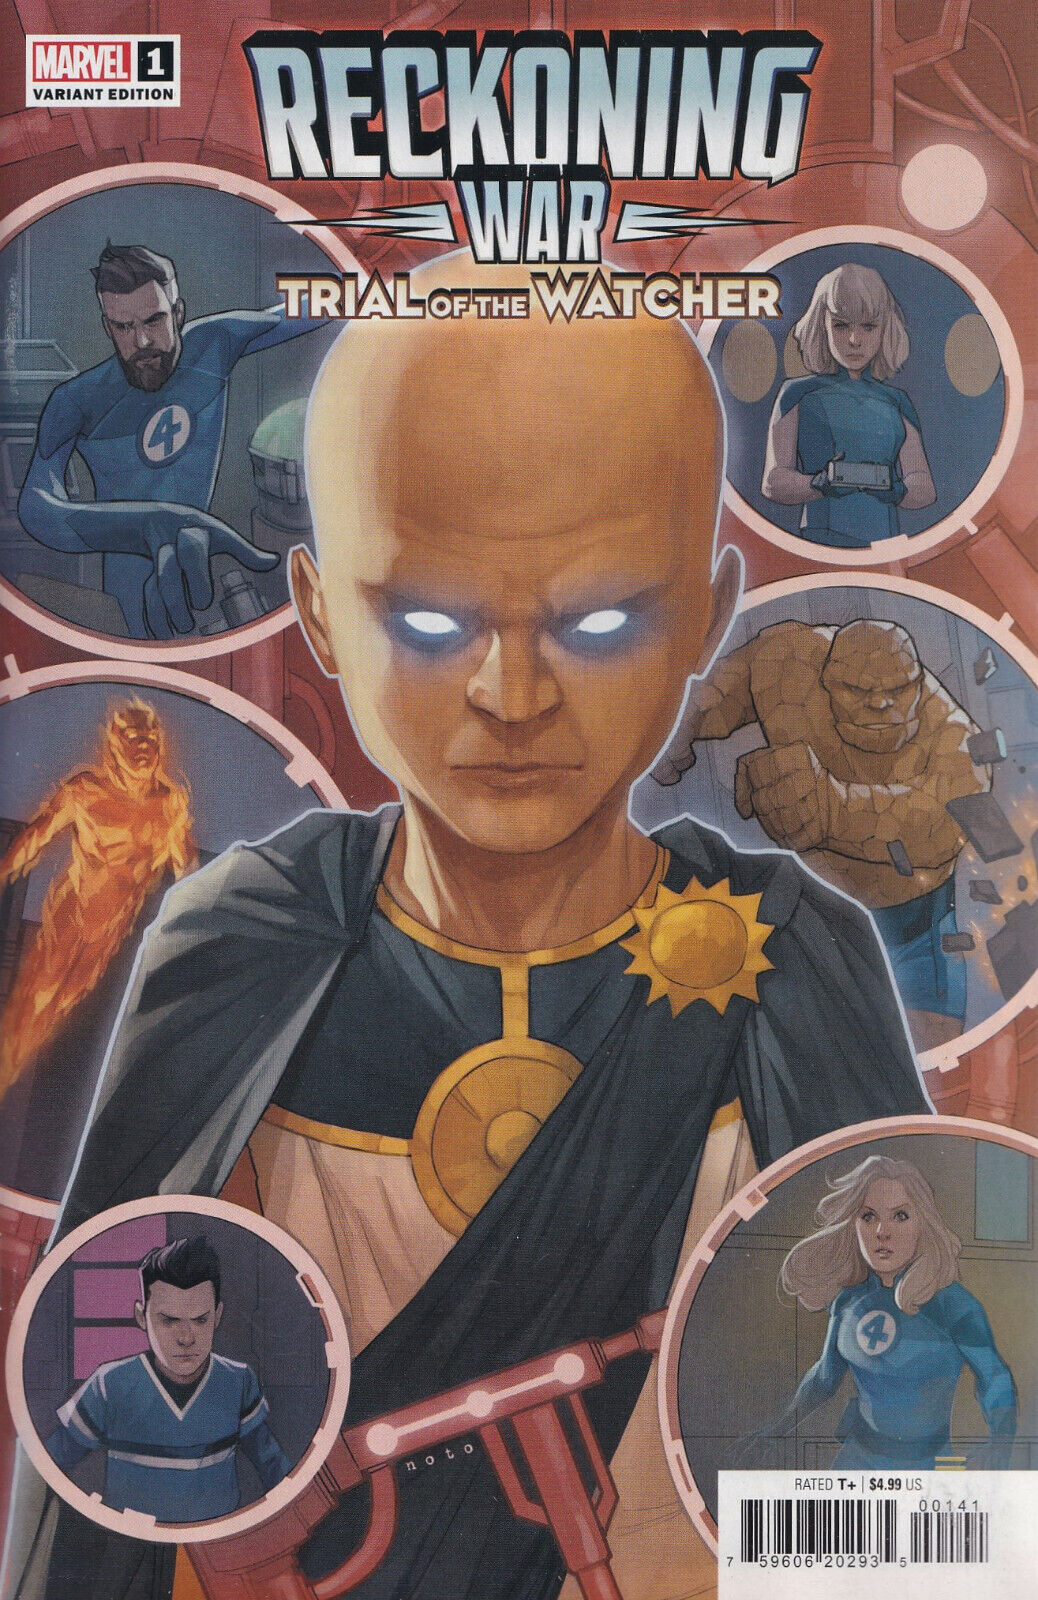 RECKONING WAR: TRIAL OF THE WATCHER #1 (PHIL NOTO 1:25 RATIO VARIANT) ~ Marvel